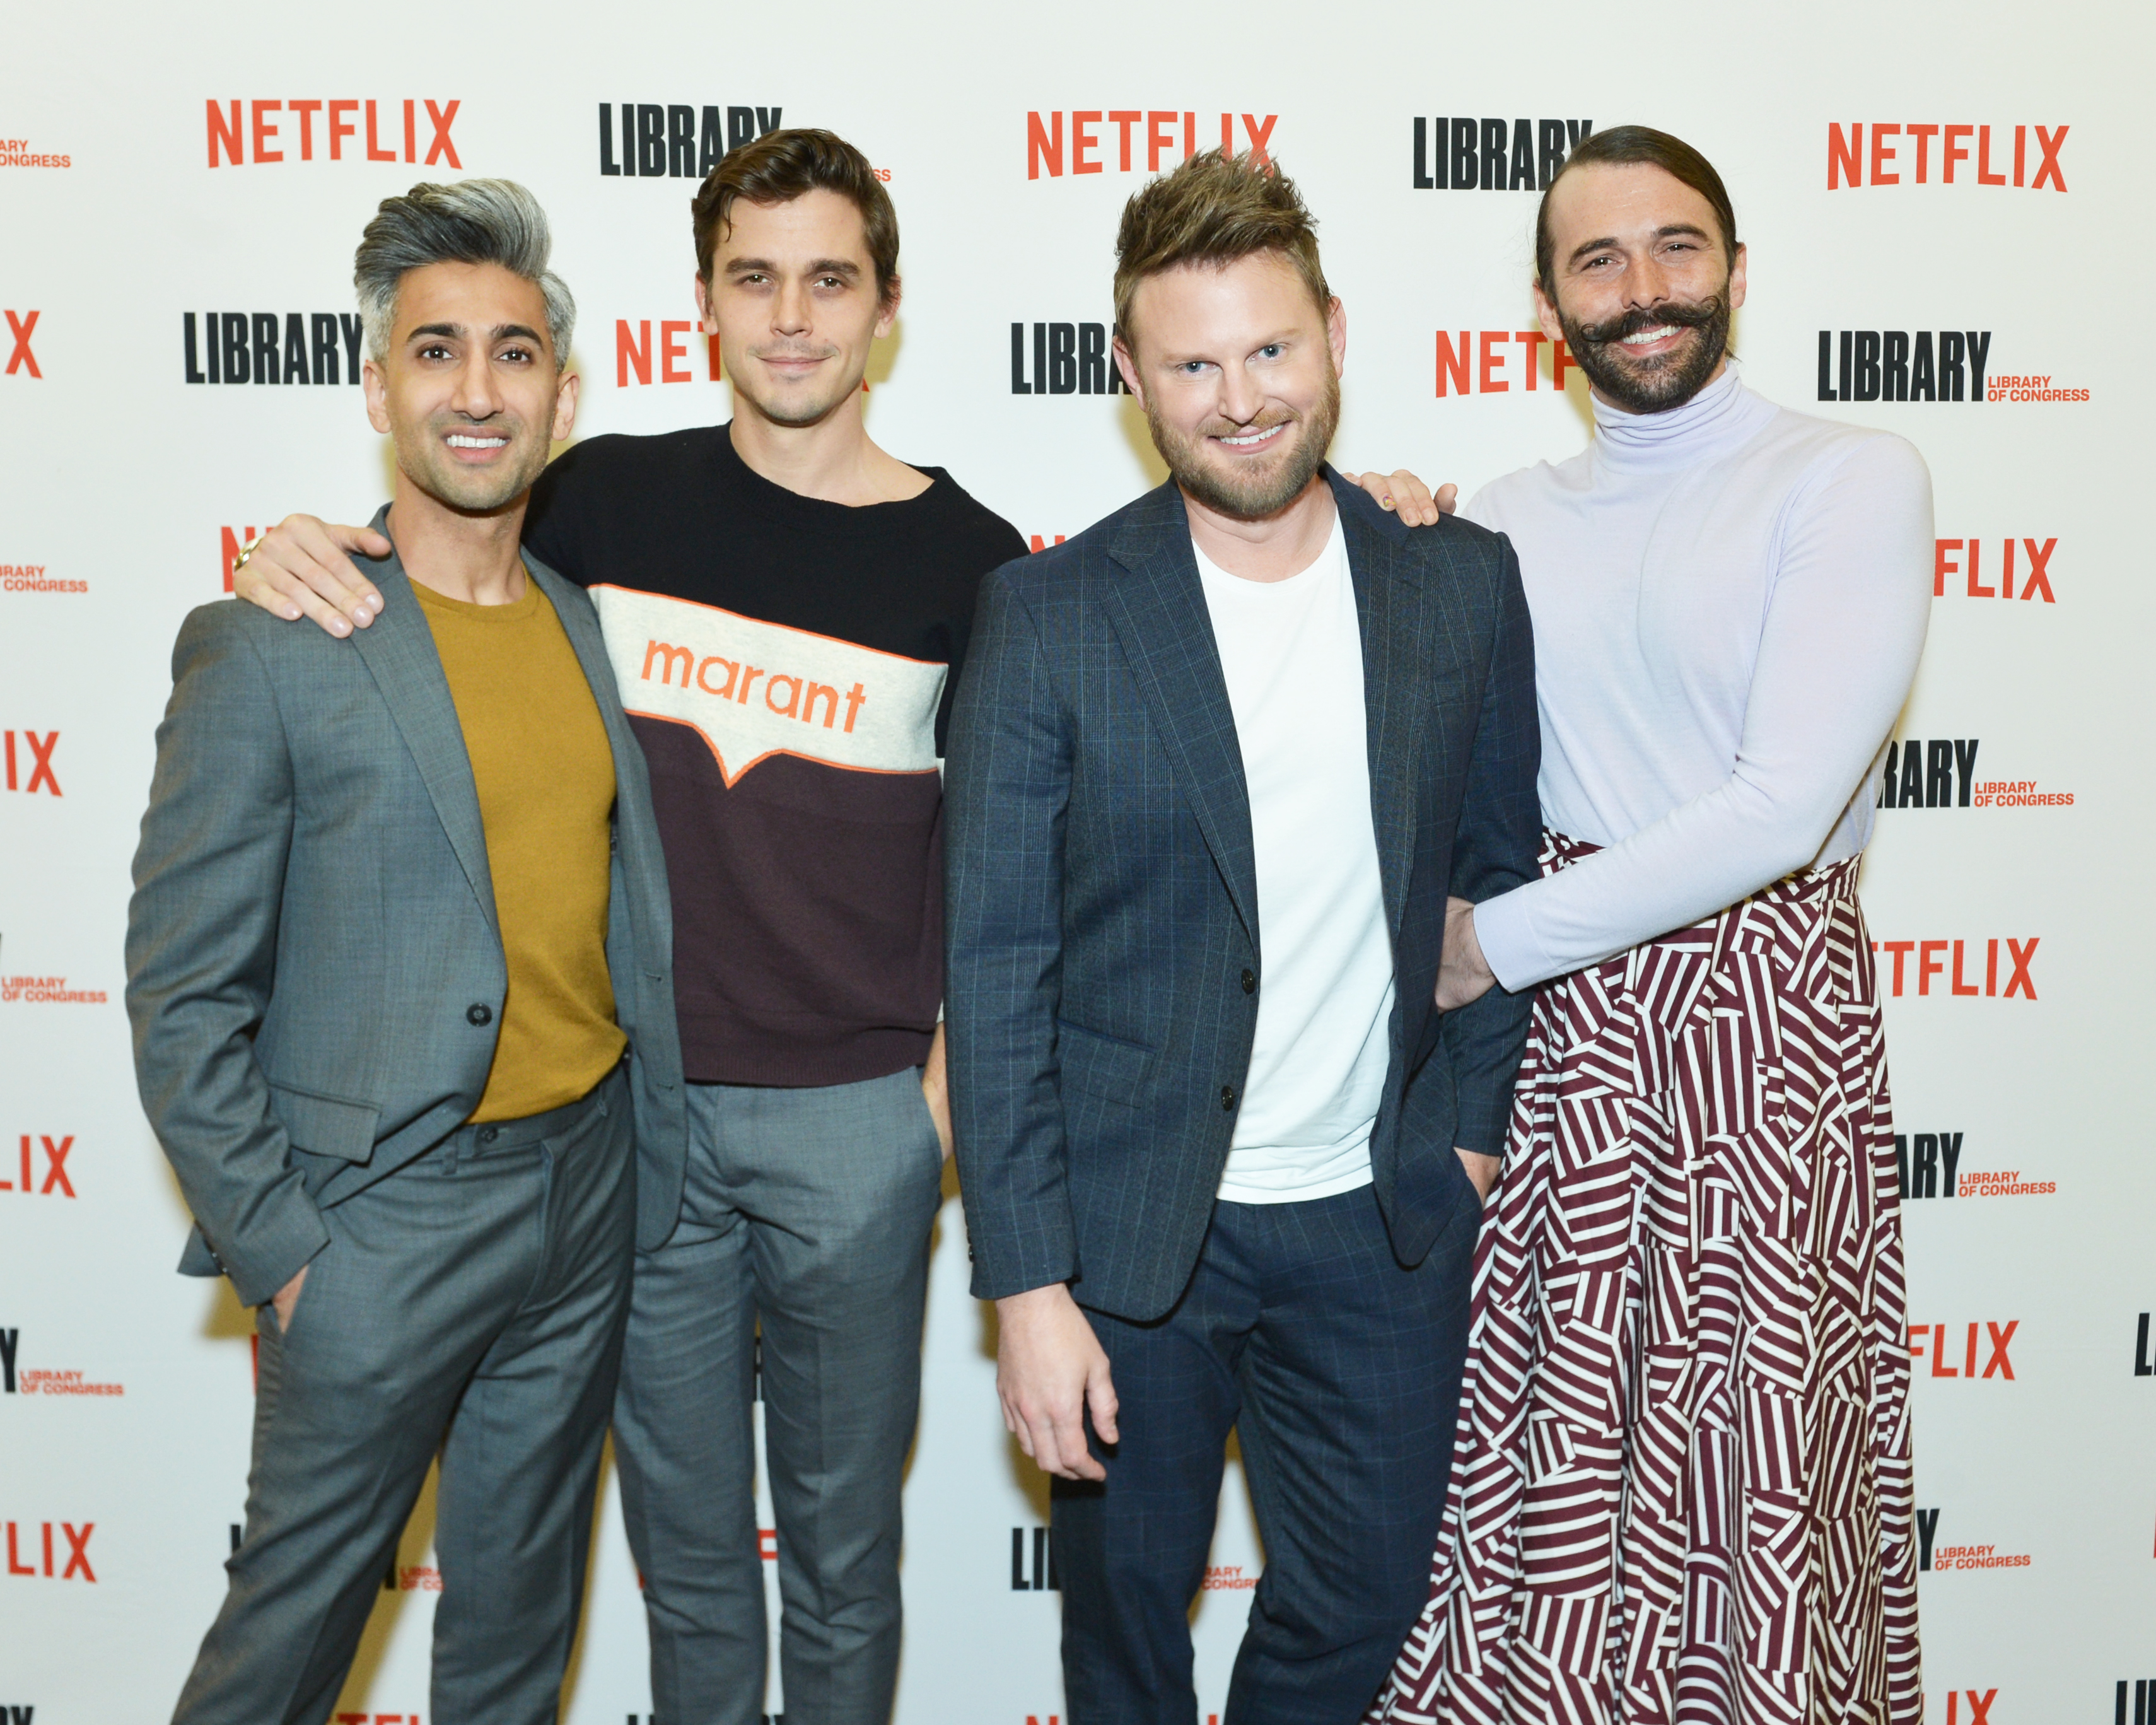 Four cast members from Queer Eye posing together at a Netflix event